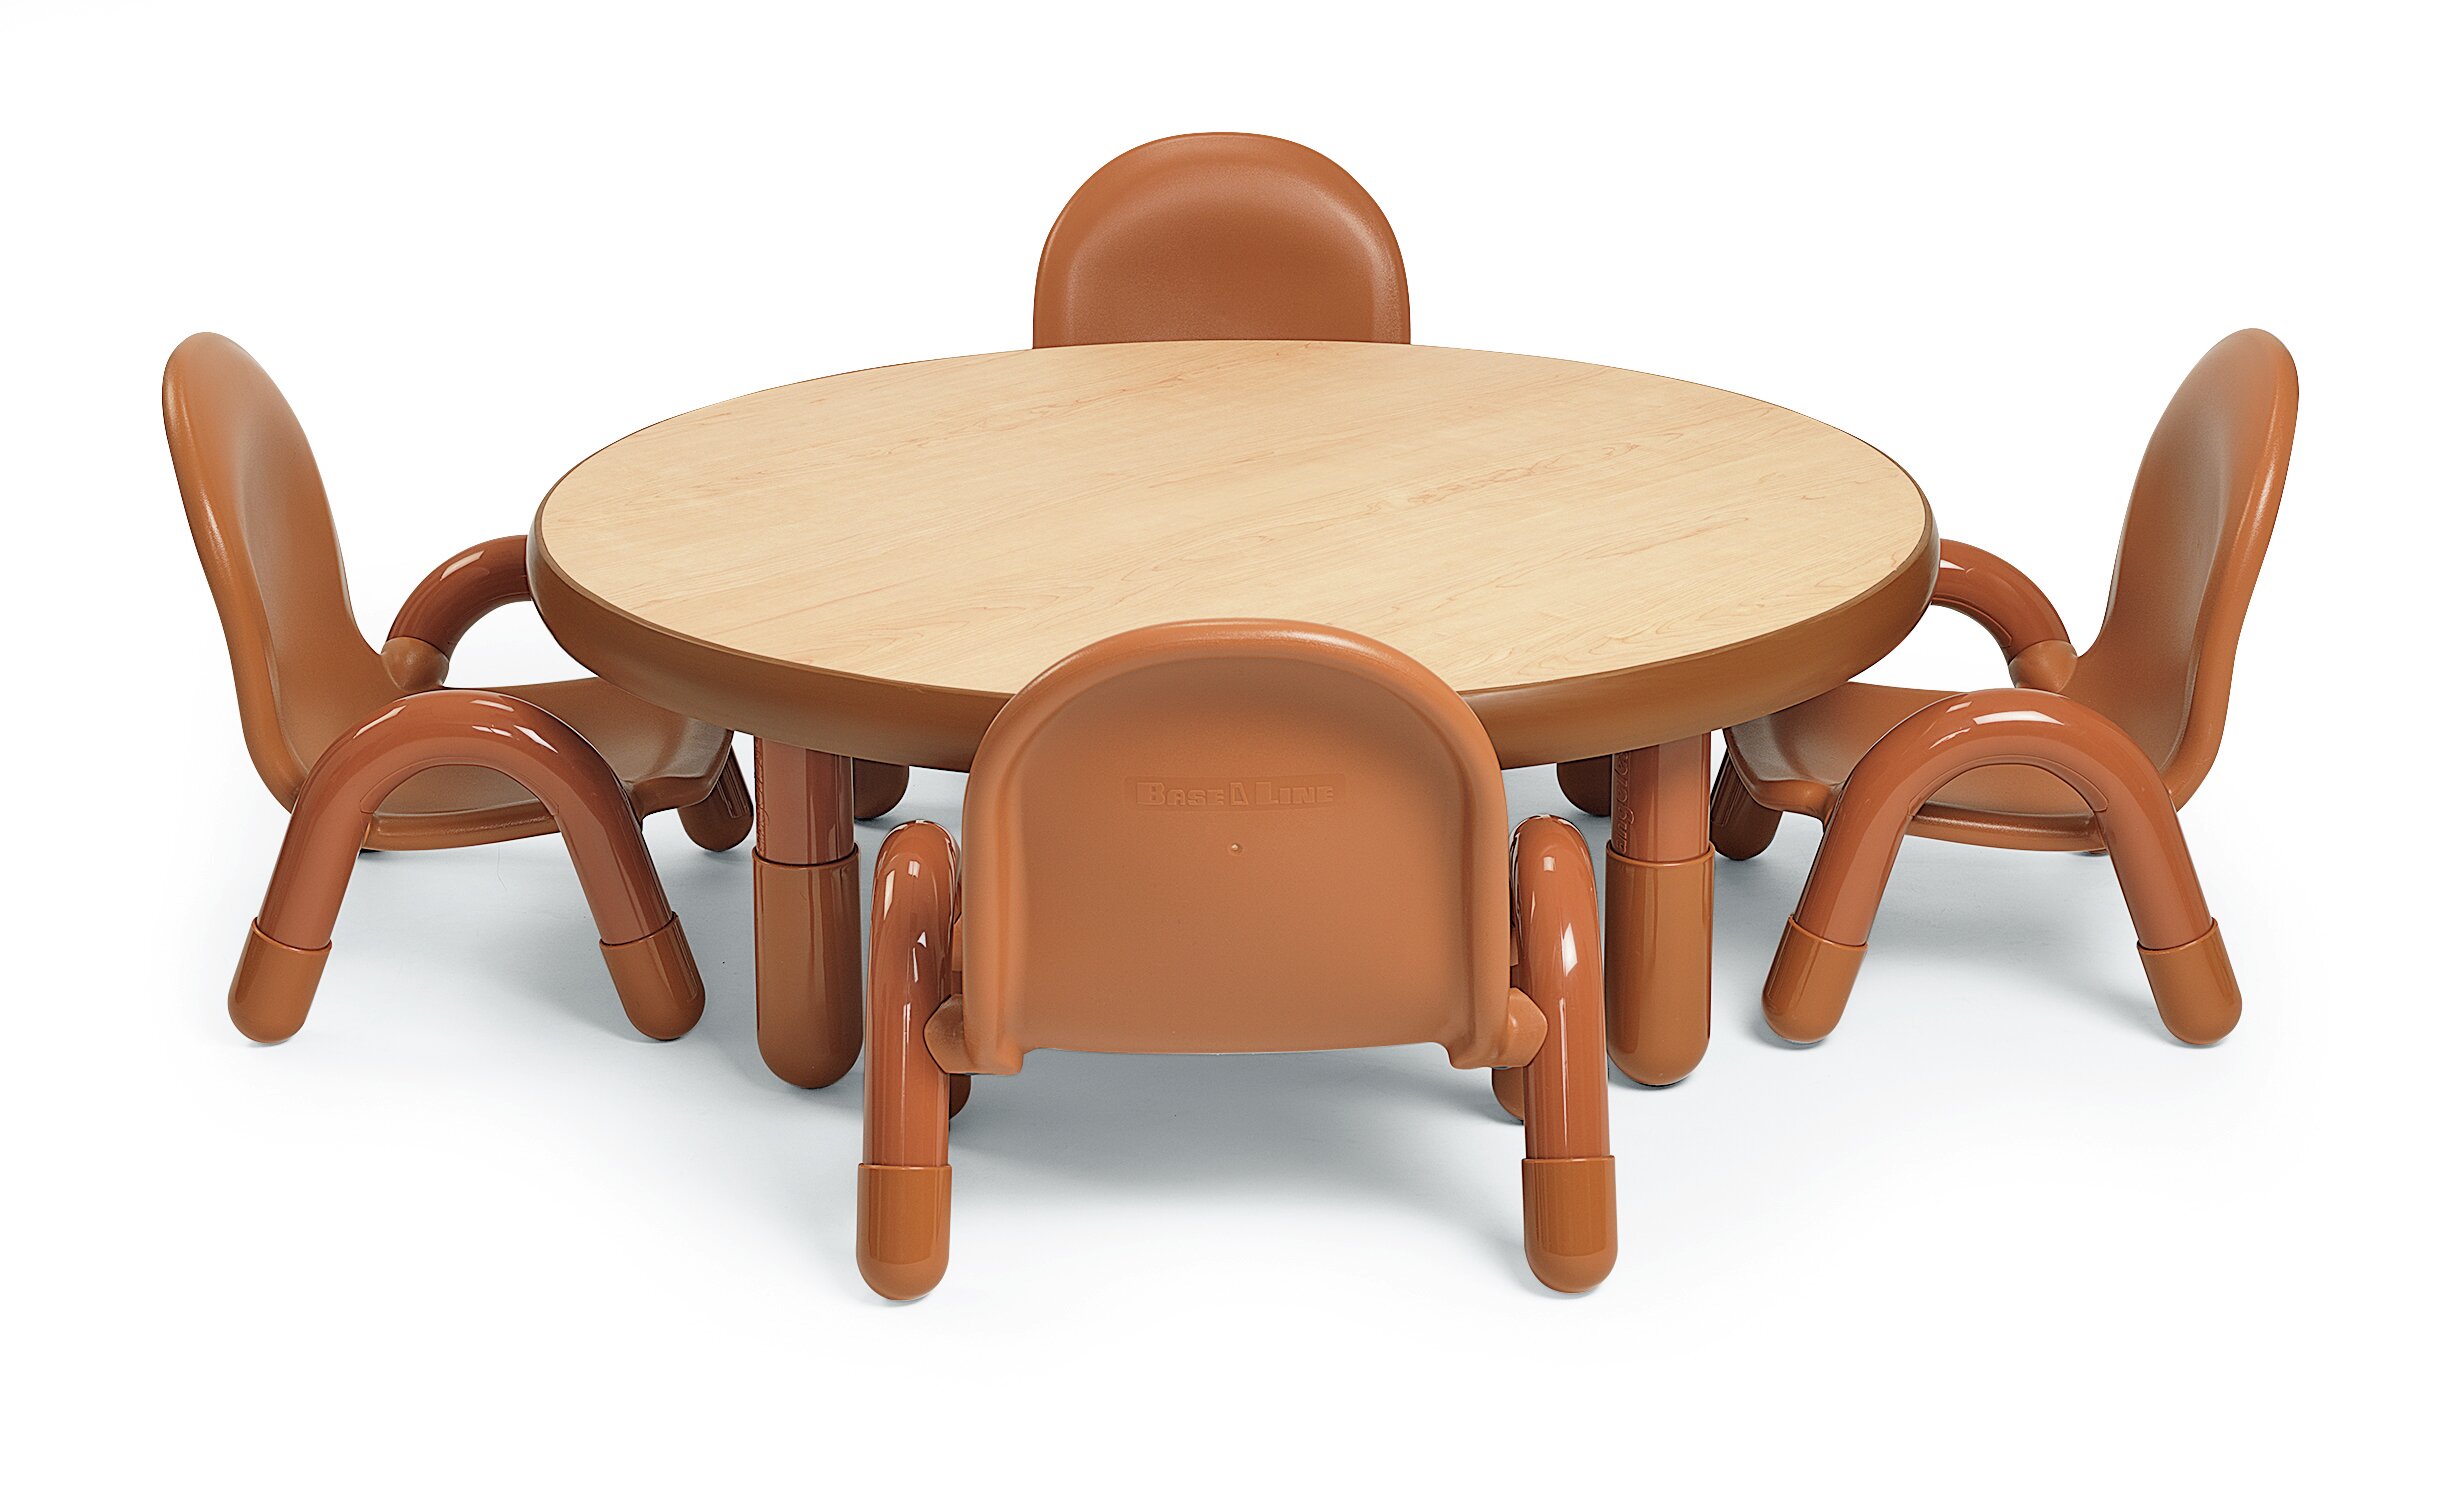 Childrens Factory Baseline Kids Round Play Activity Table And Chair Set Wayfair